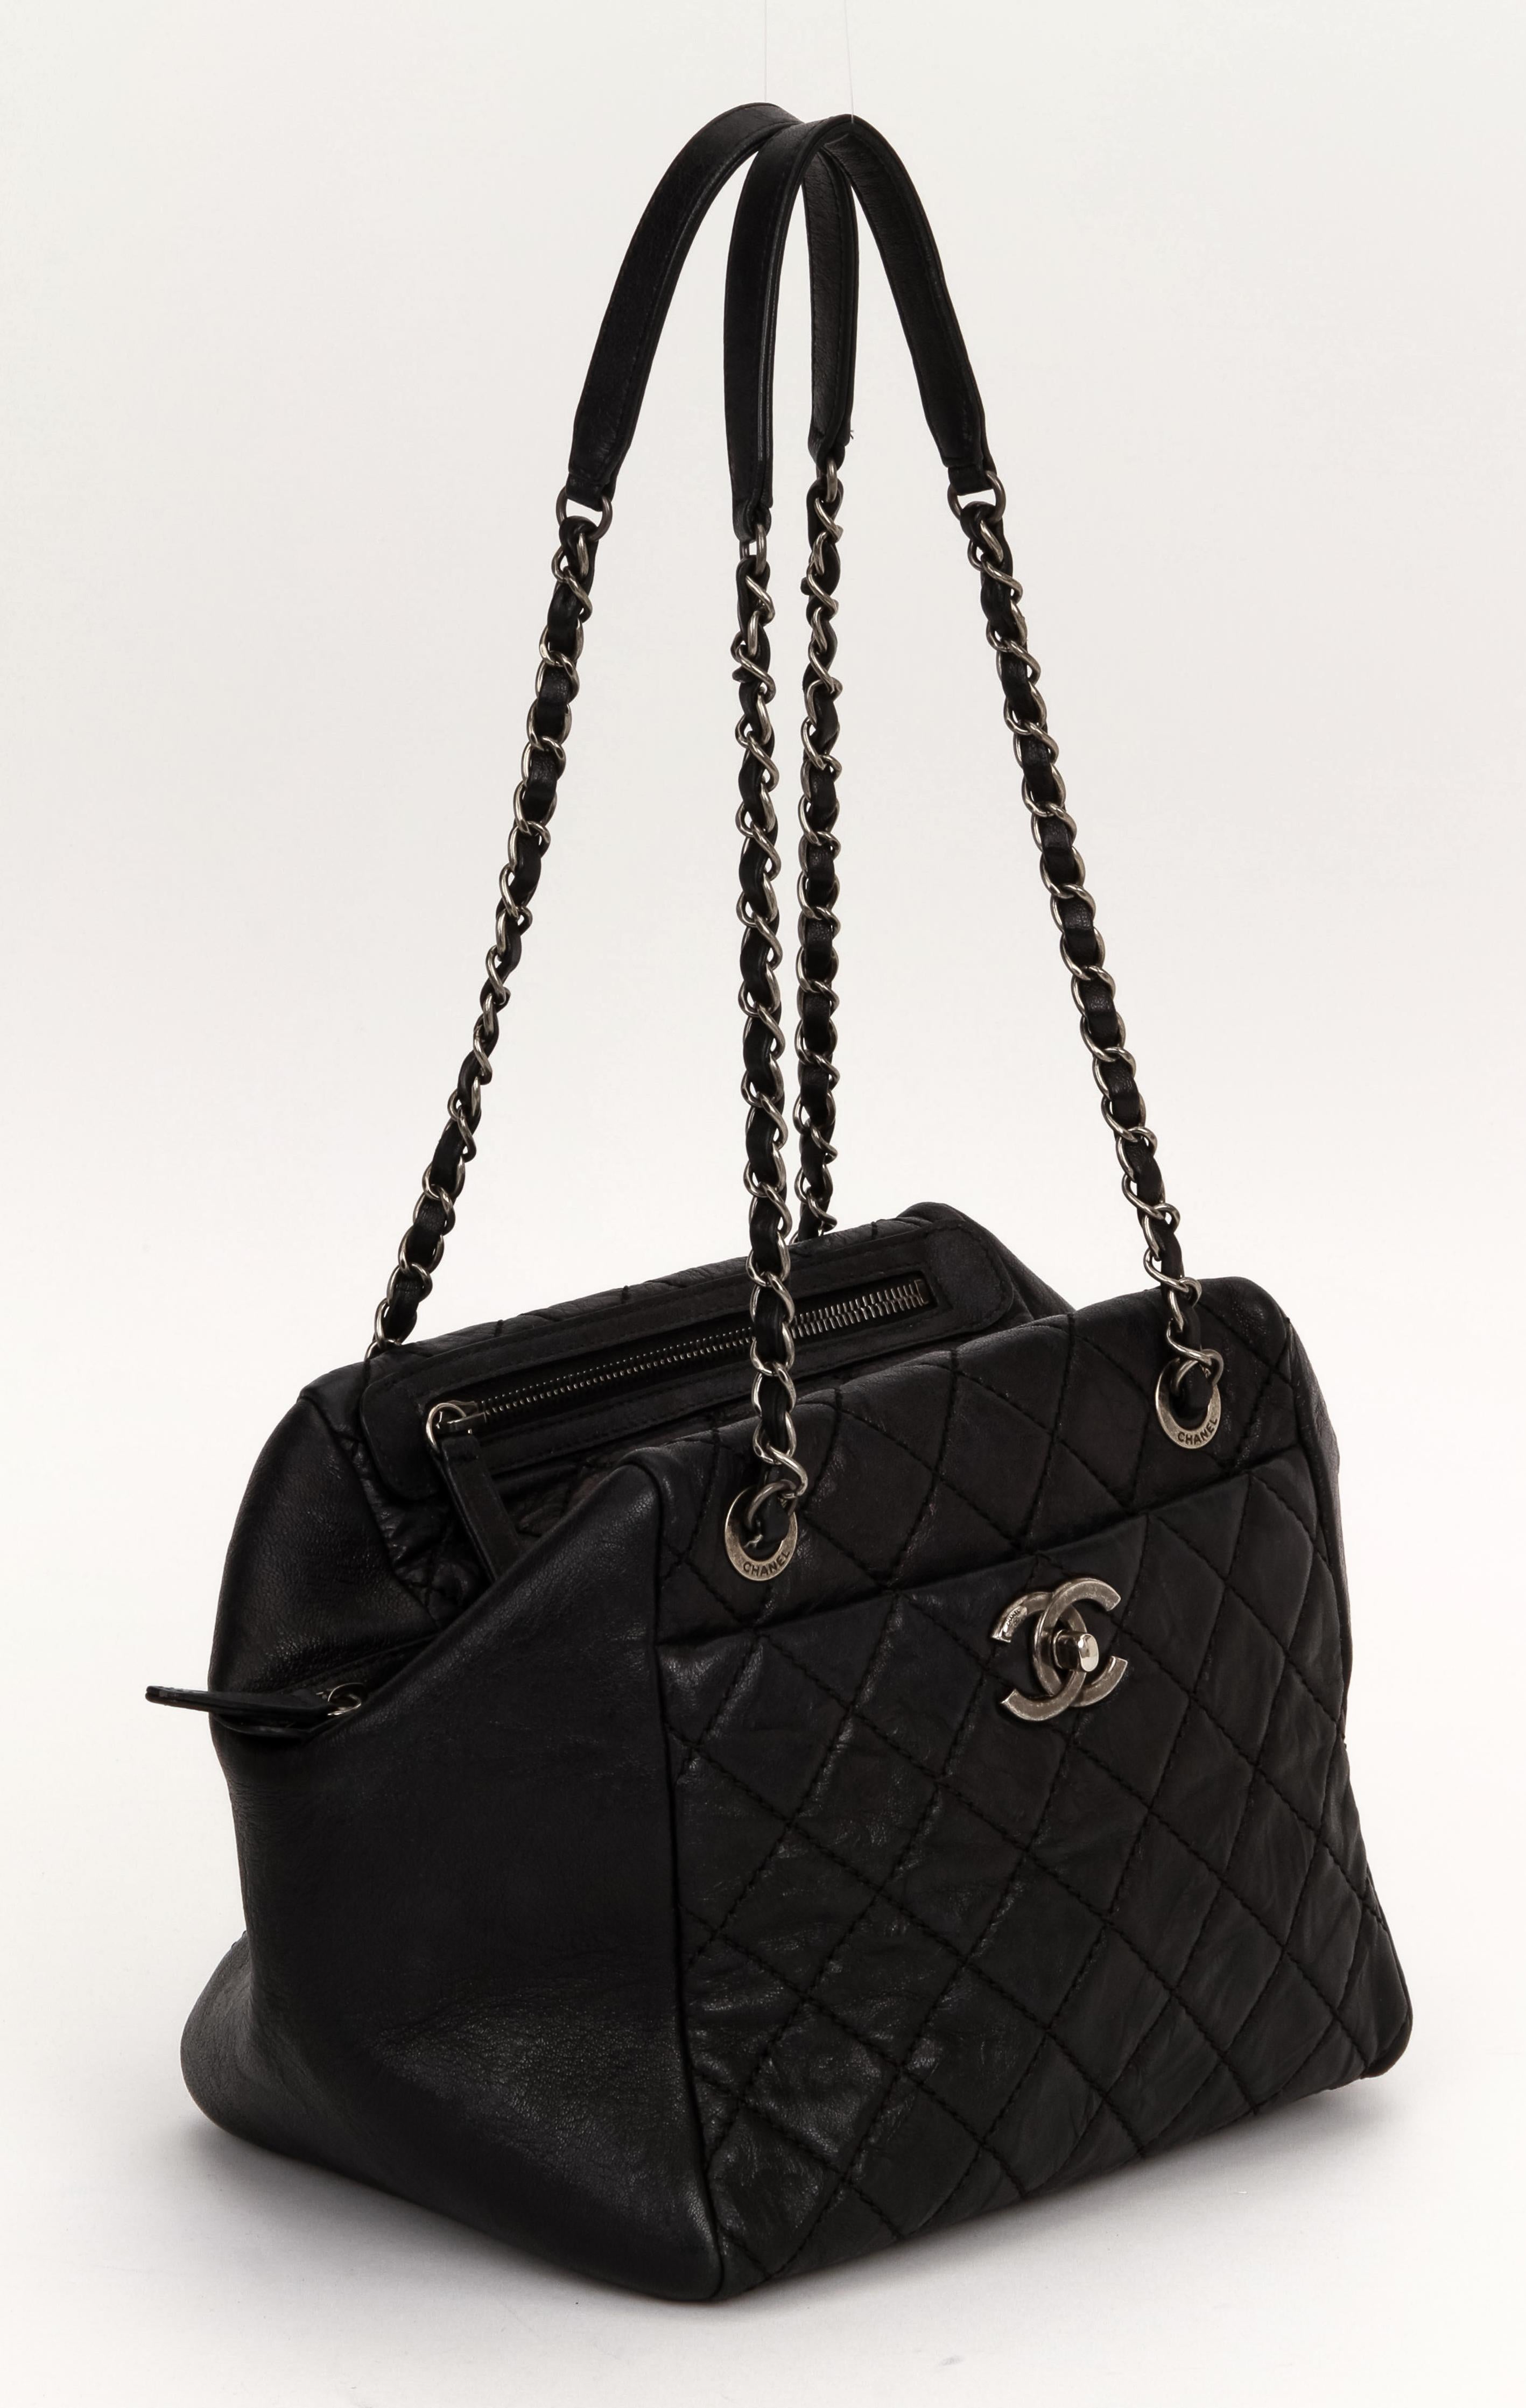 Chanel black caviar shoulder bag with two top zippers, one pocket and one center compartment. Plastic still on interior zipper pull. Ruthenium hardware. Shoulder drop 9